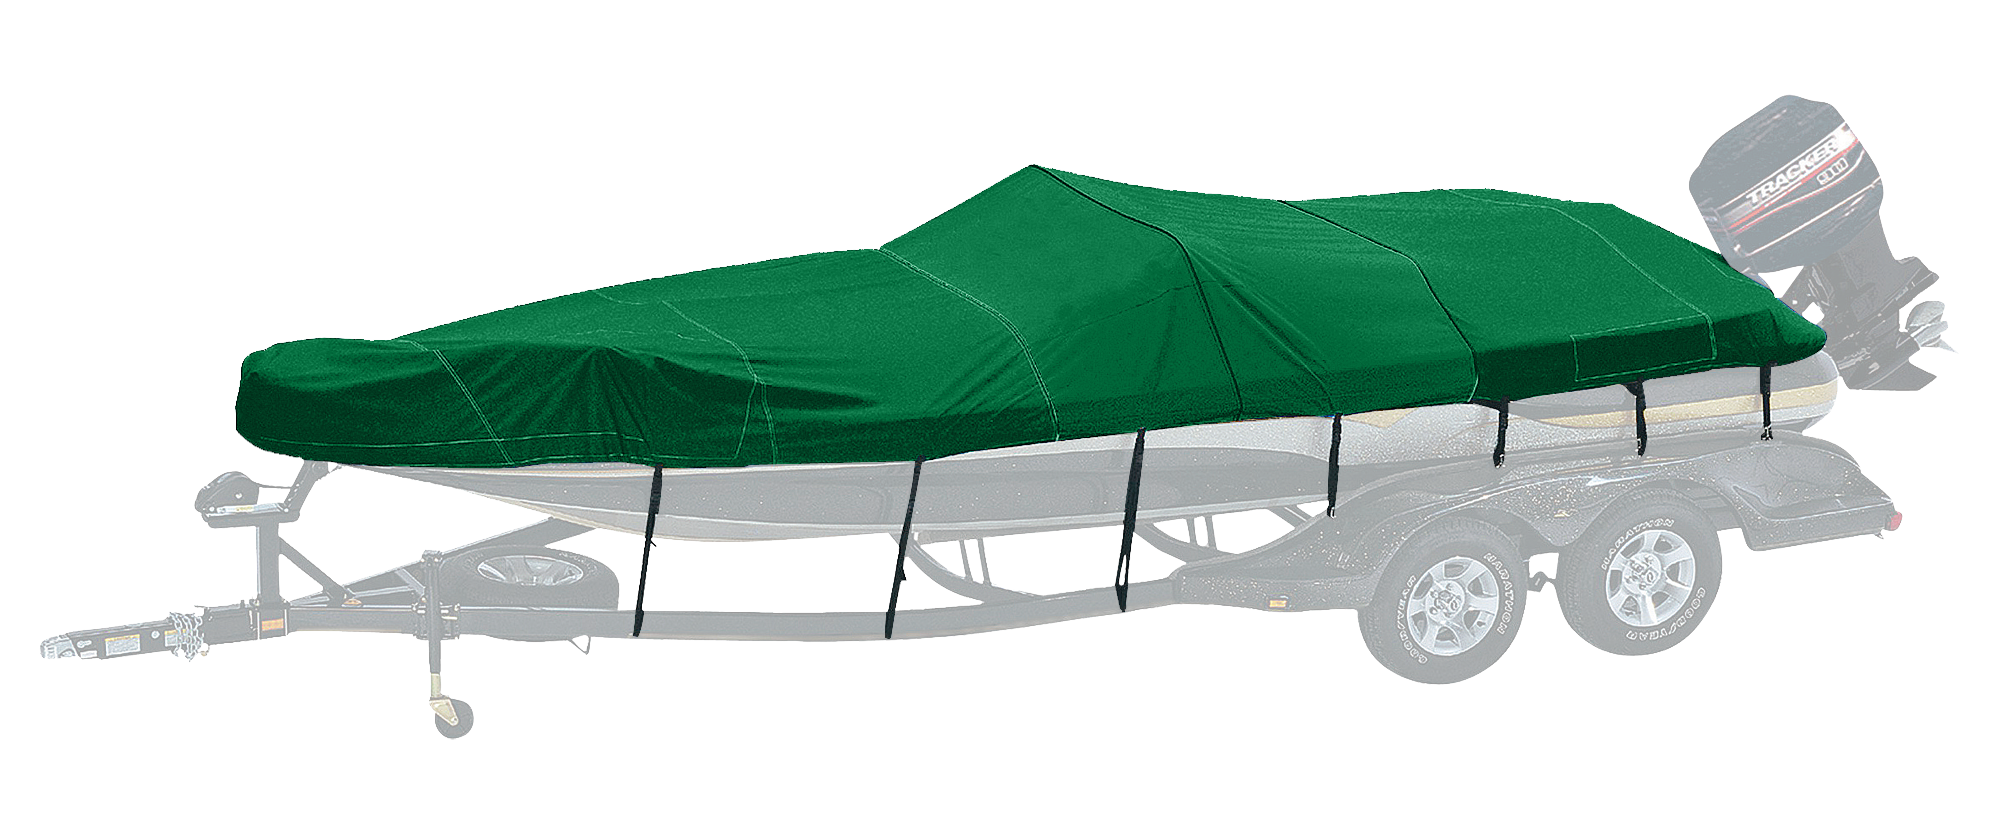 Bass Pro Shops Exact Fit Custom Boat Cover by Westland - Tracker Boats - 2004-2005 Tundra 21 SC - Forest Green